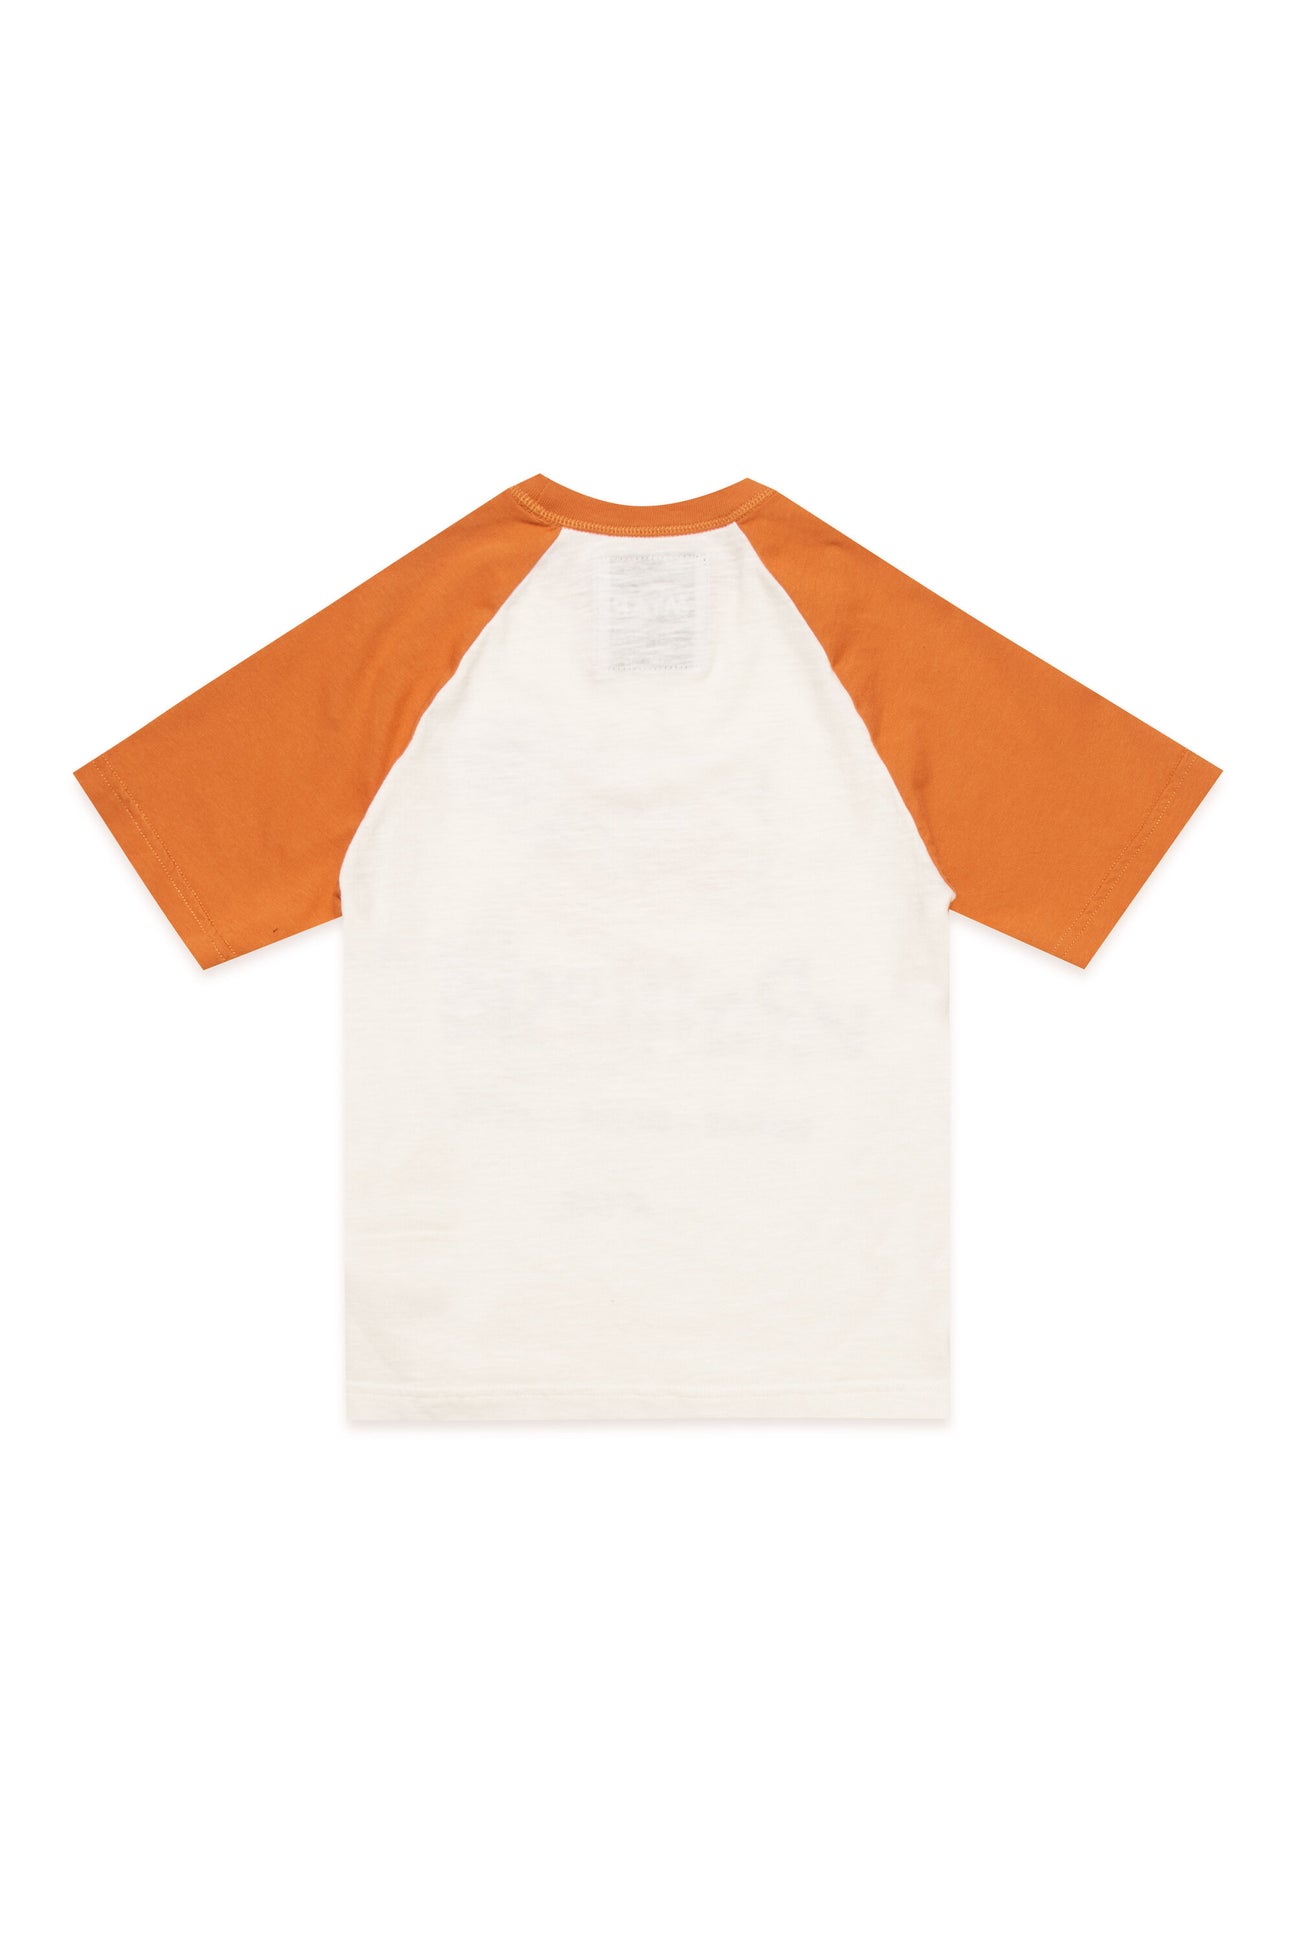 Two-tone white and orange deadstock fabric crew-neck T-shirt with Rafflesia digital print Two-tone white and orange deadstock fabric crew-neck T-shirt with Rafflesia digital print